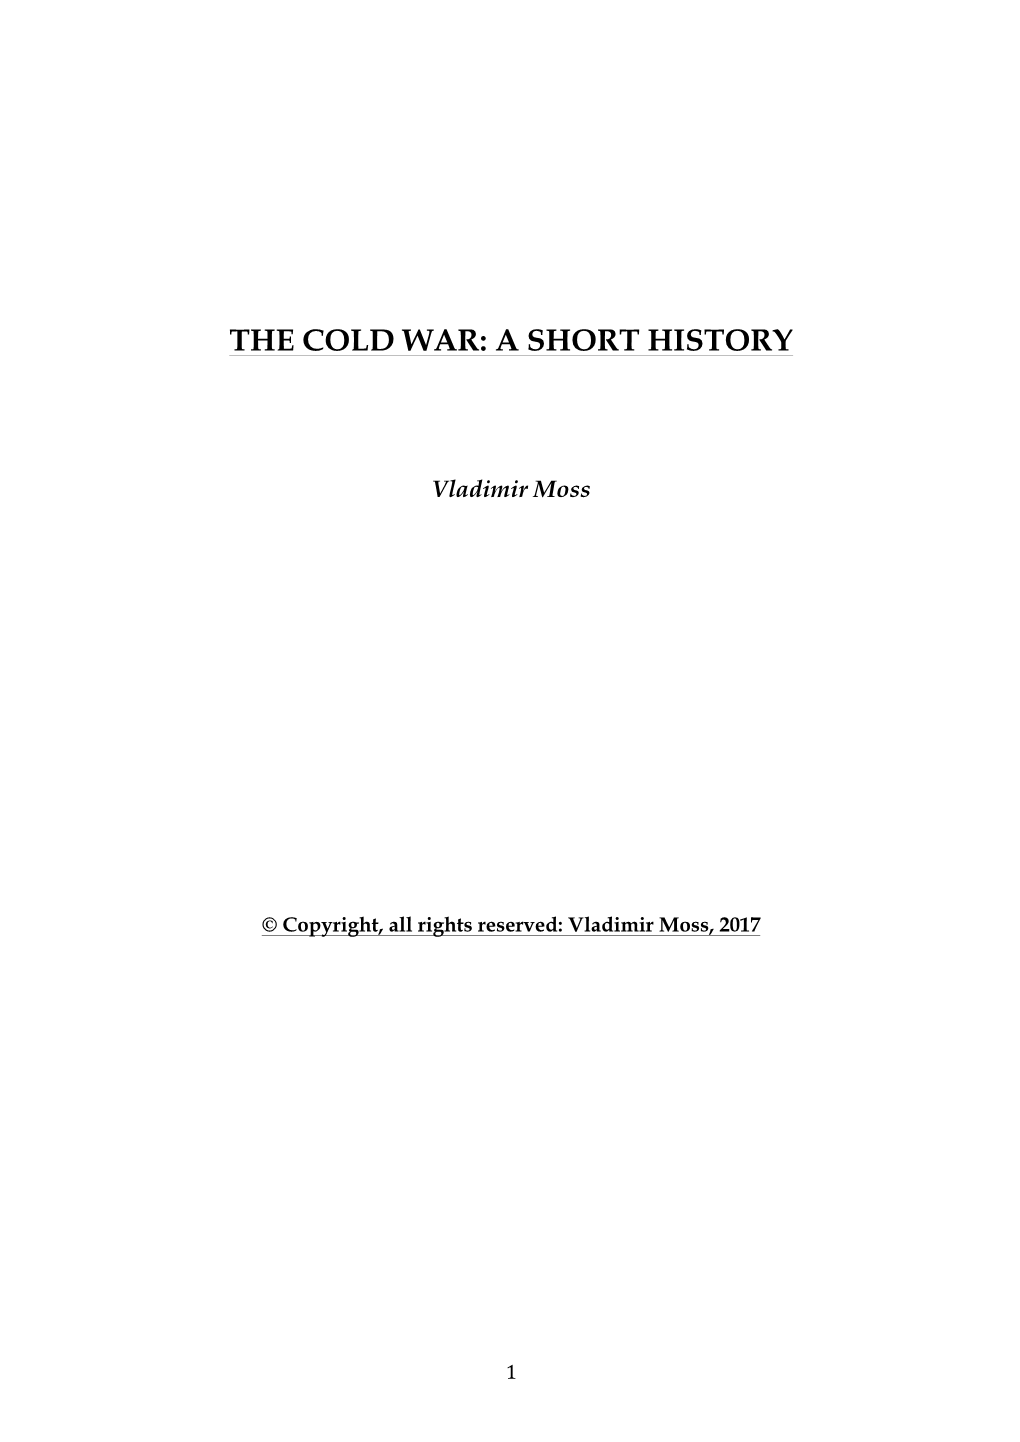 The Cold War: a Short History